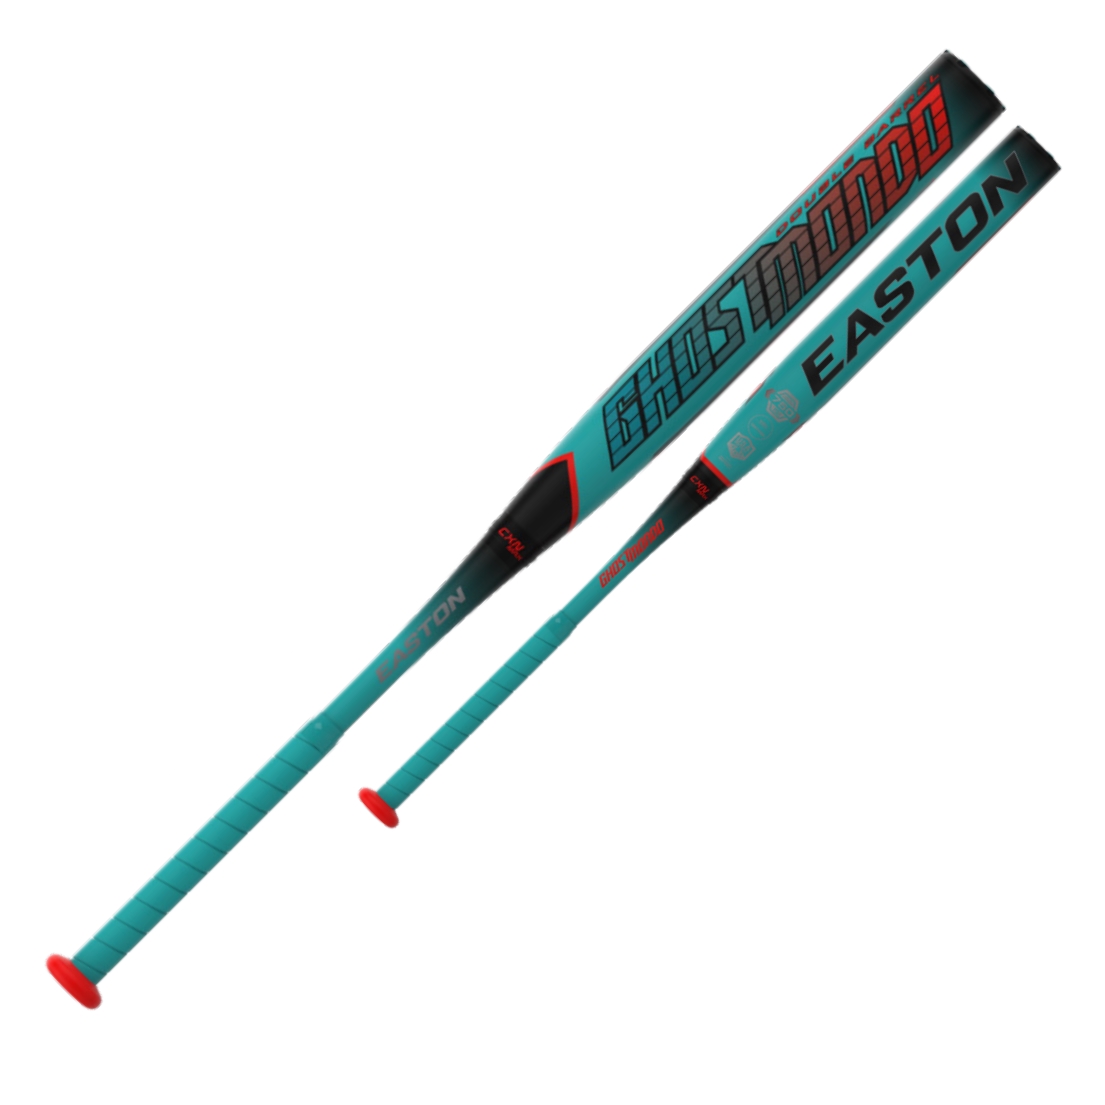 easton-ghostmondo-ext-12-5-load-usa-softball-bat-34-inch-28-oz SP22GHML-3428 Easton 628412361603 Double Barrel Technology – Delivers soft barrel compression and hot performance